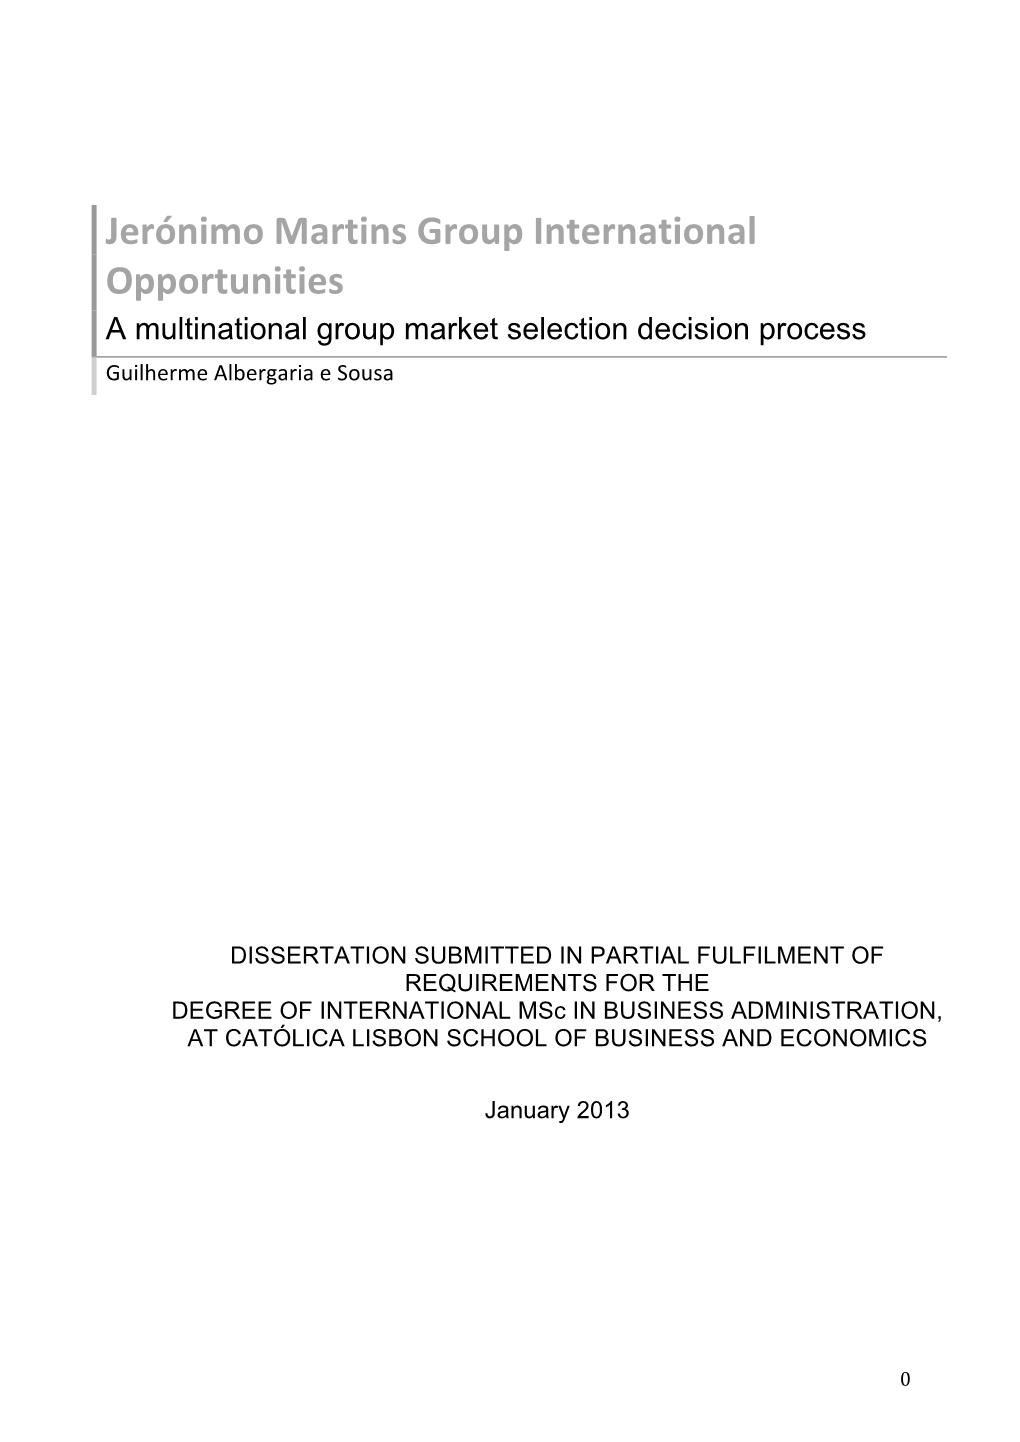 Jerónimo Martins Group International Opportunities a Multinational Group Market Selection Decision Process Guilherme Albergaria E Sousa